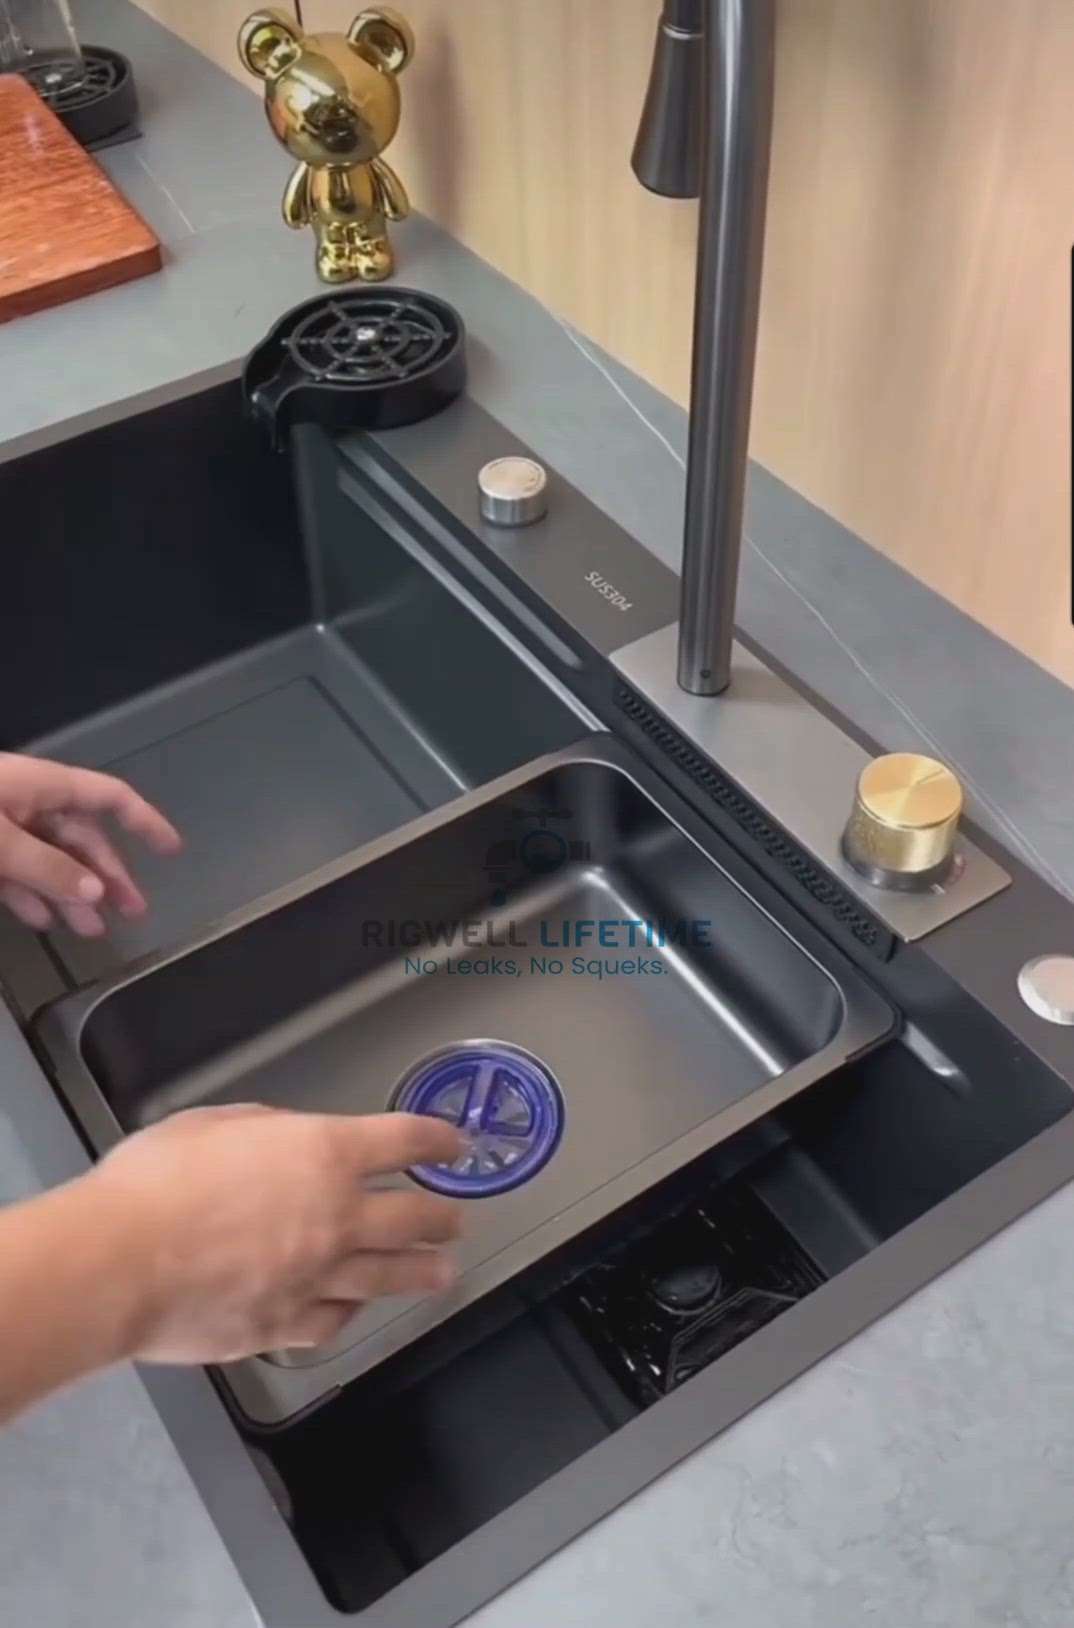 Rigwell Lifetime waterfall fountain kitchen sink.
10 years replacement guarantee .
 
shop at- https://rigwelllifetimeonline.com/product/30-18-10-waterfall-fountain-designer-kitchen-sink/

contact- 9810840470 

 #KitchenIdeas  #kitchenstyle  #KitchenCabinet  #KitchenInterior  #ModularKitchen  #kitchensink #kitchensinks #KitchenRenovation #InteriorDesigner #Architect #Architectural&Interior